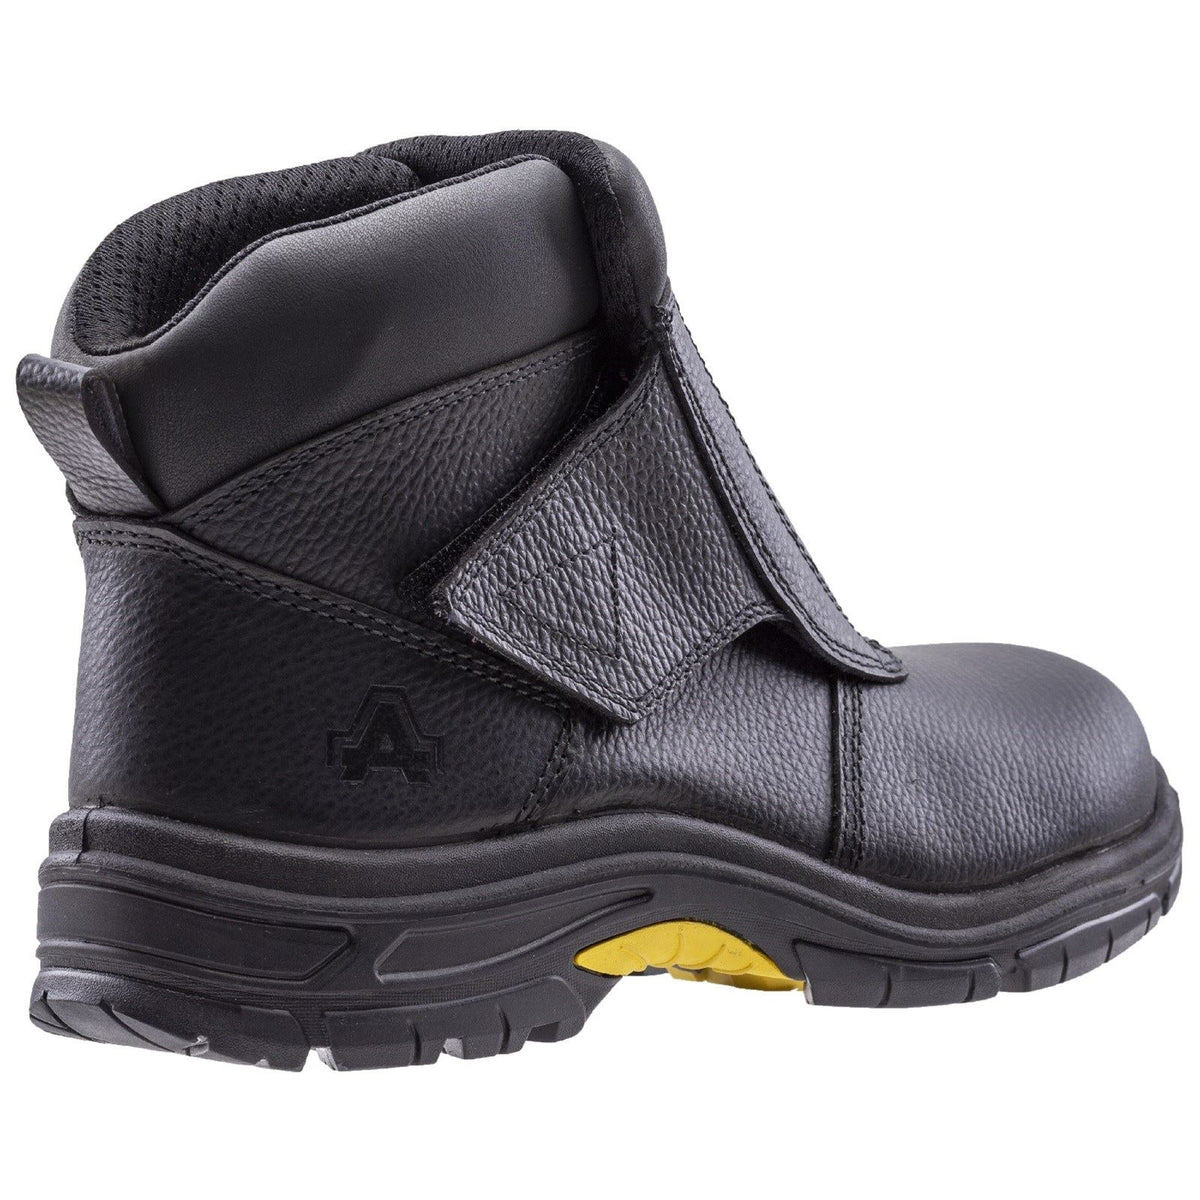 Amblers Safety AS950 Welding Safety Boots